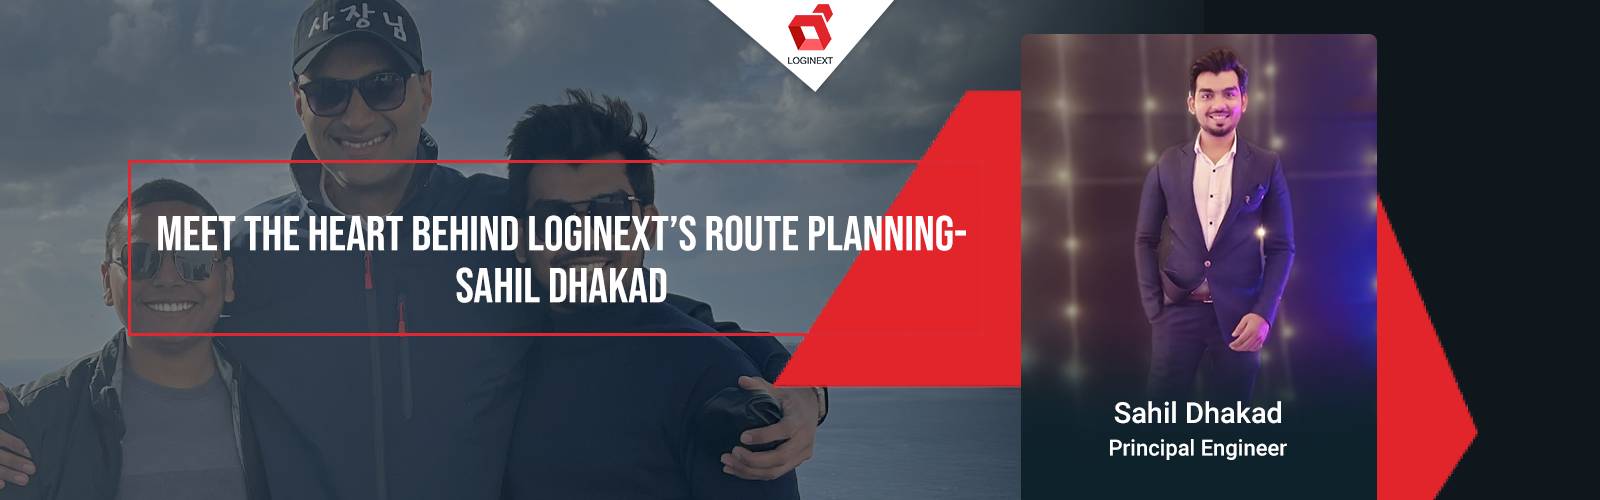 The heart behind LogiNext's Route Planning- Sahil Dhakad on WeAreLogiNext